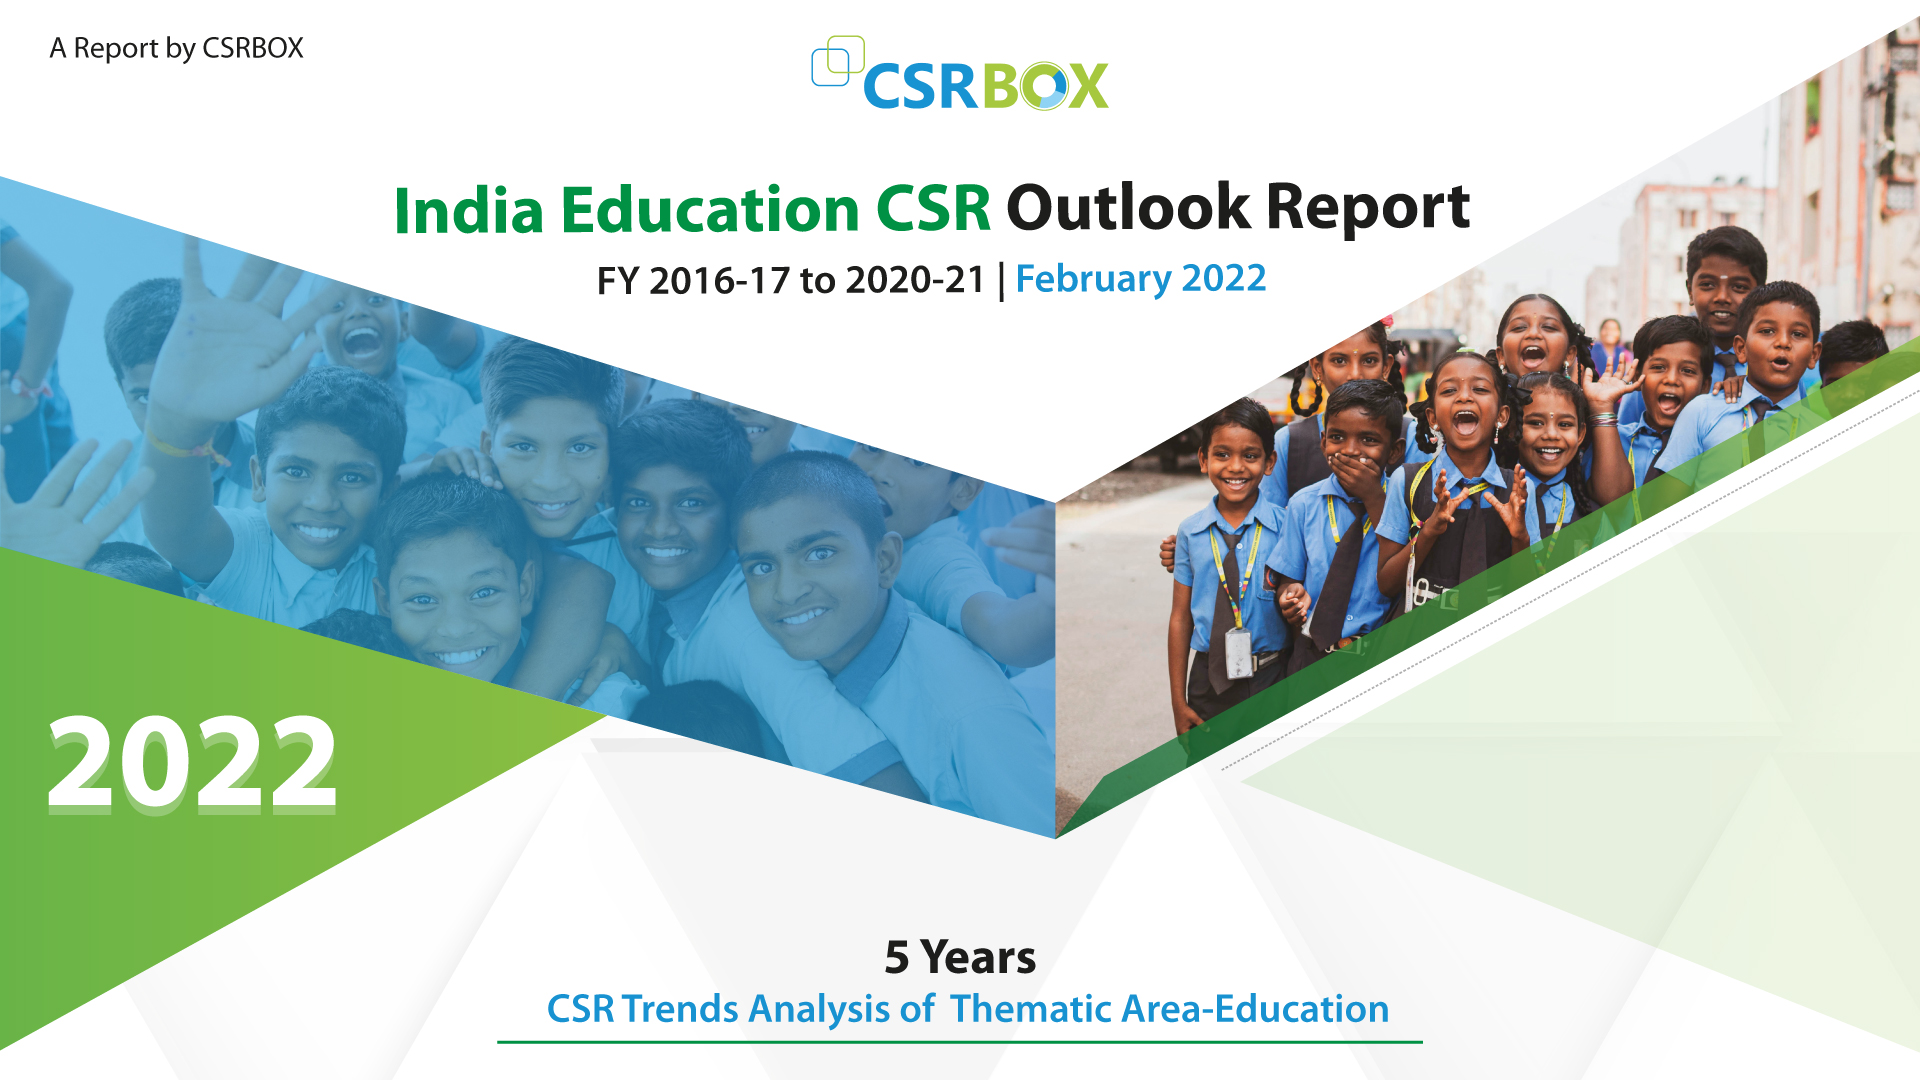 Large Indian companies spent over INR 13000 Cr. on Education CSR projects in past 5 years